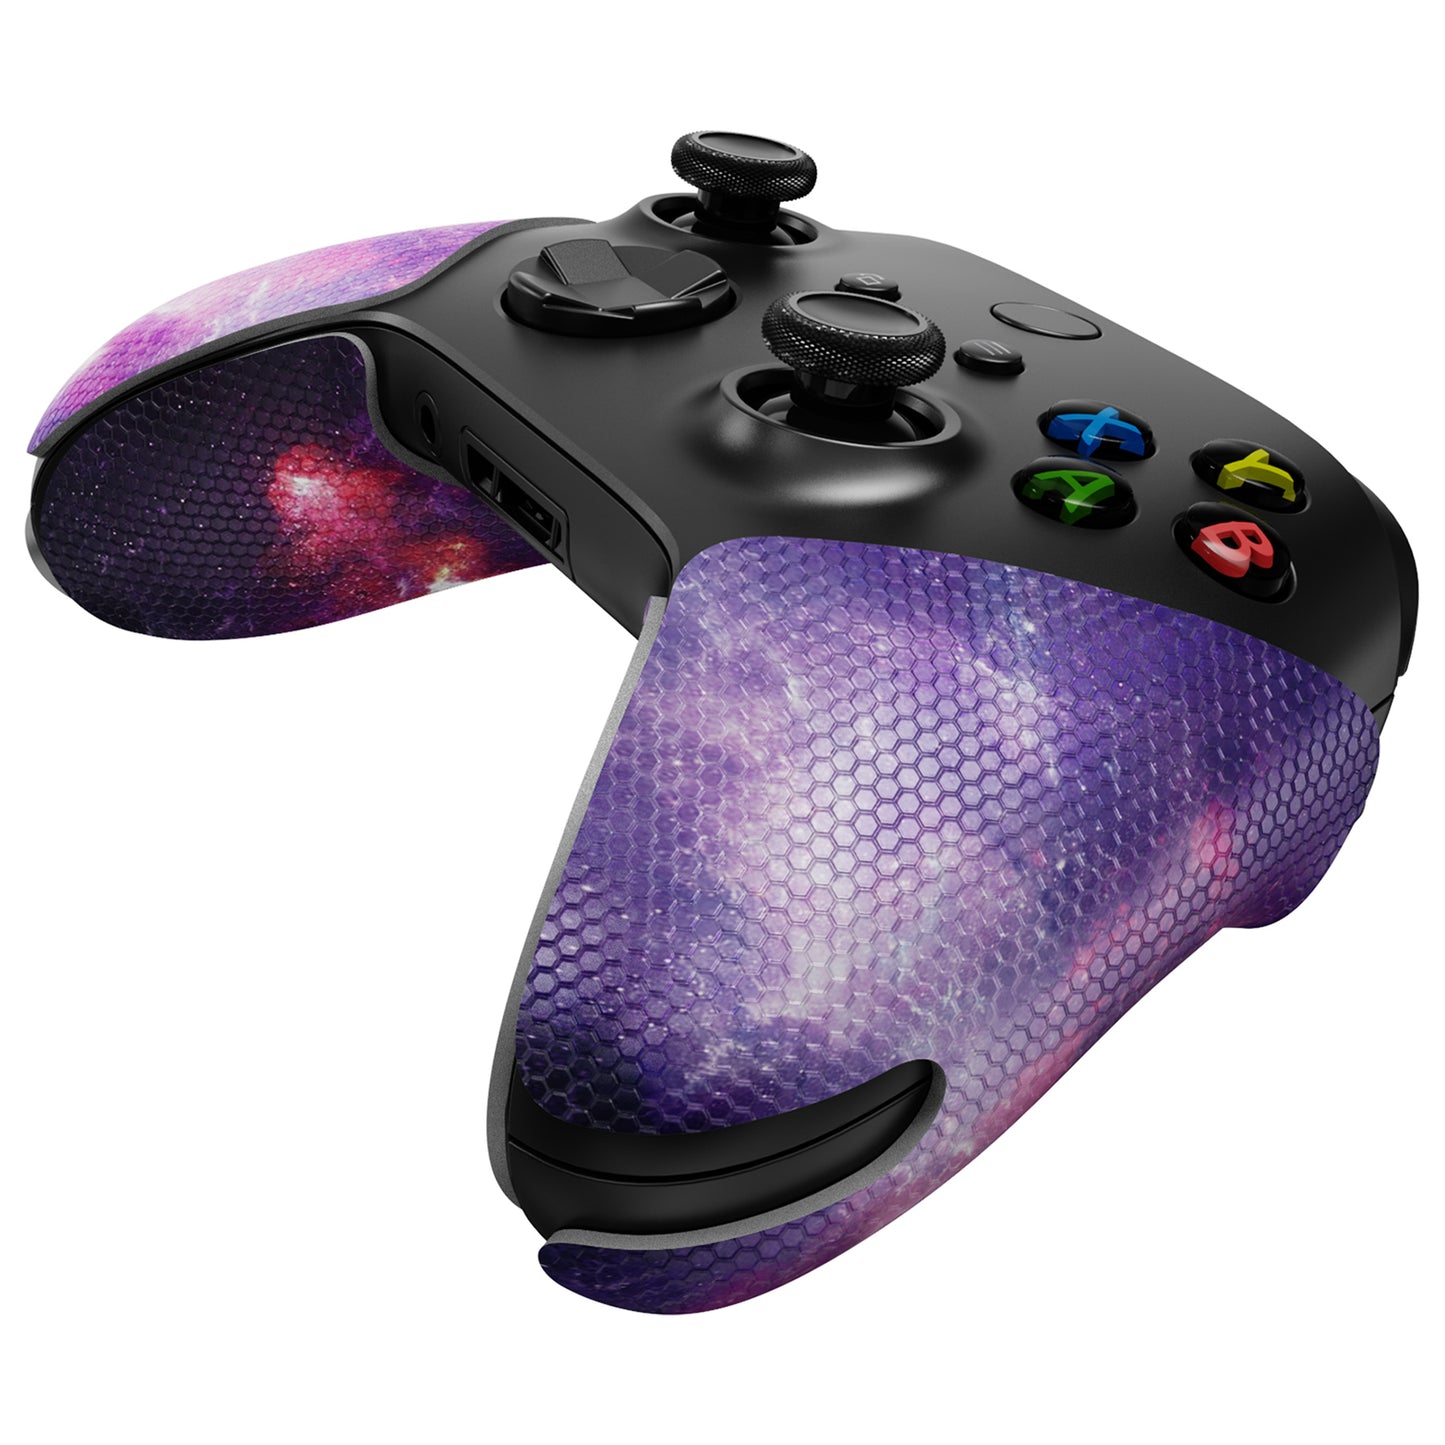 PlayVital Anti-Skid Sweat-Absorbent Controller Grip for Xbox Series X/S Controller, Professional Textured Soft Rubber Pads Handle Grips for Xbox Core Wireless Controller - Nebula Galaxy - X3PJ046 PlayVital